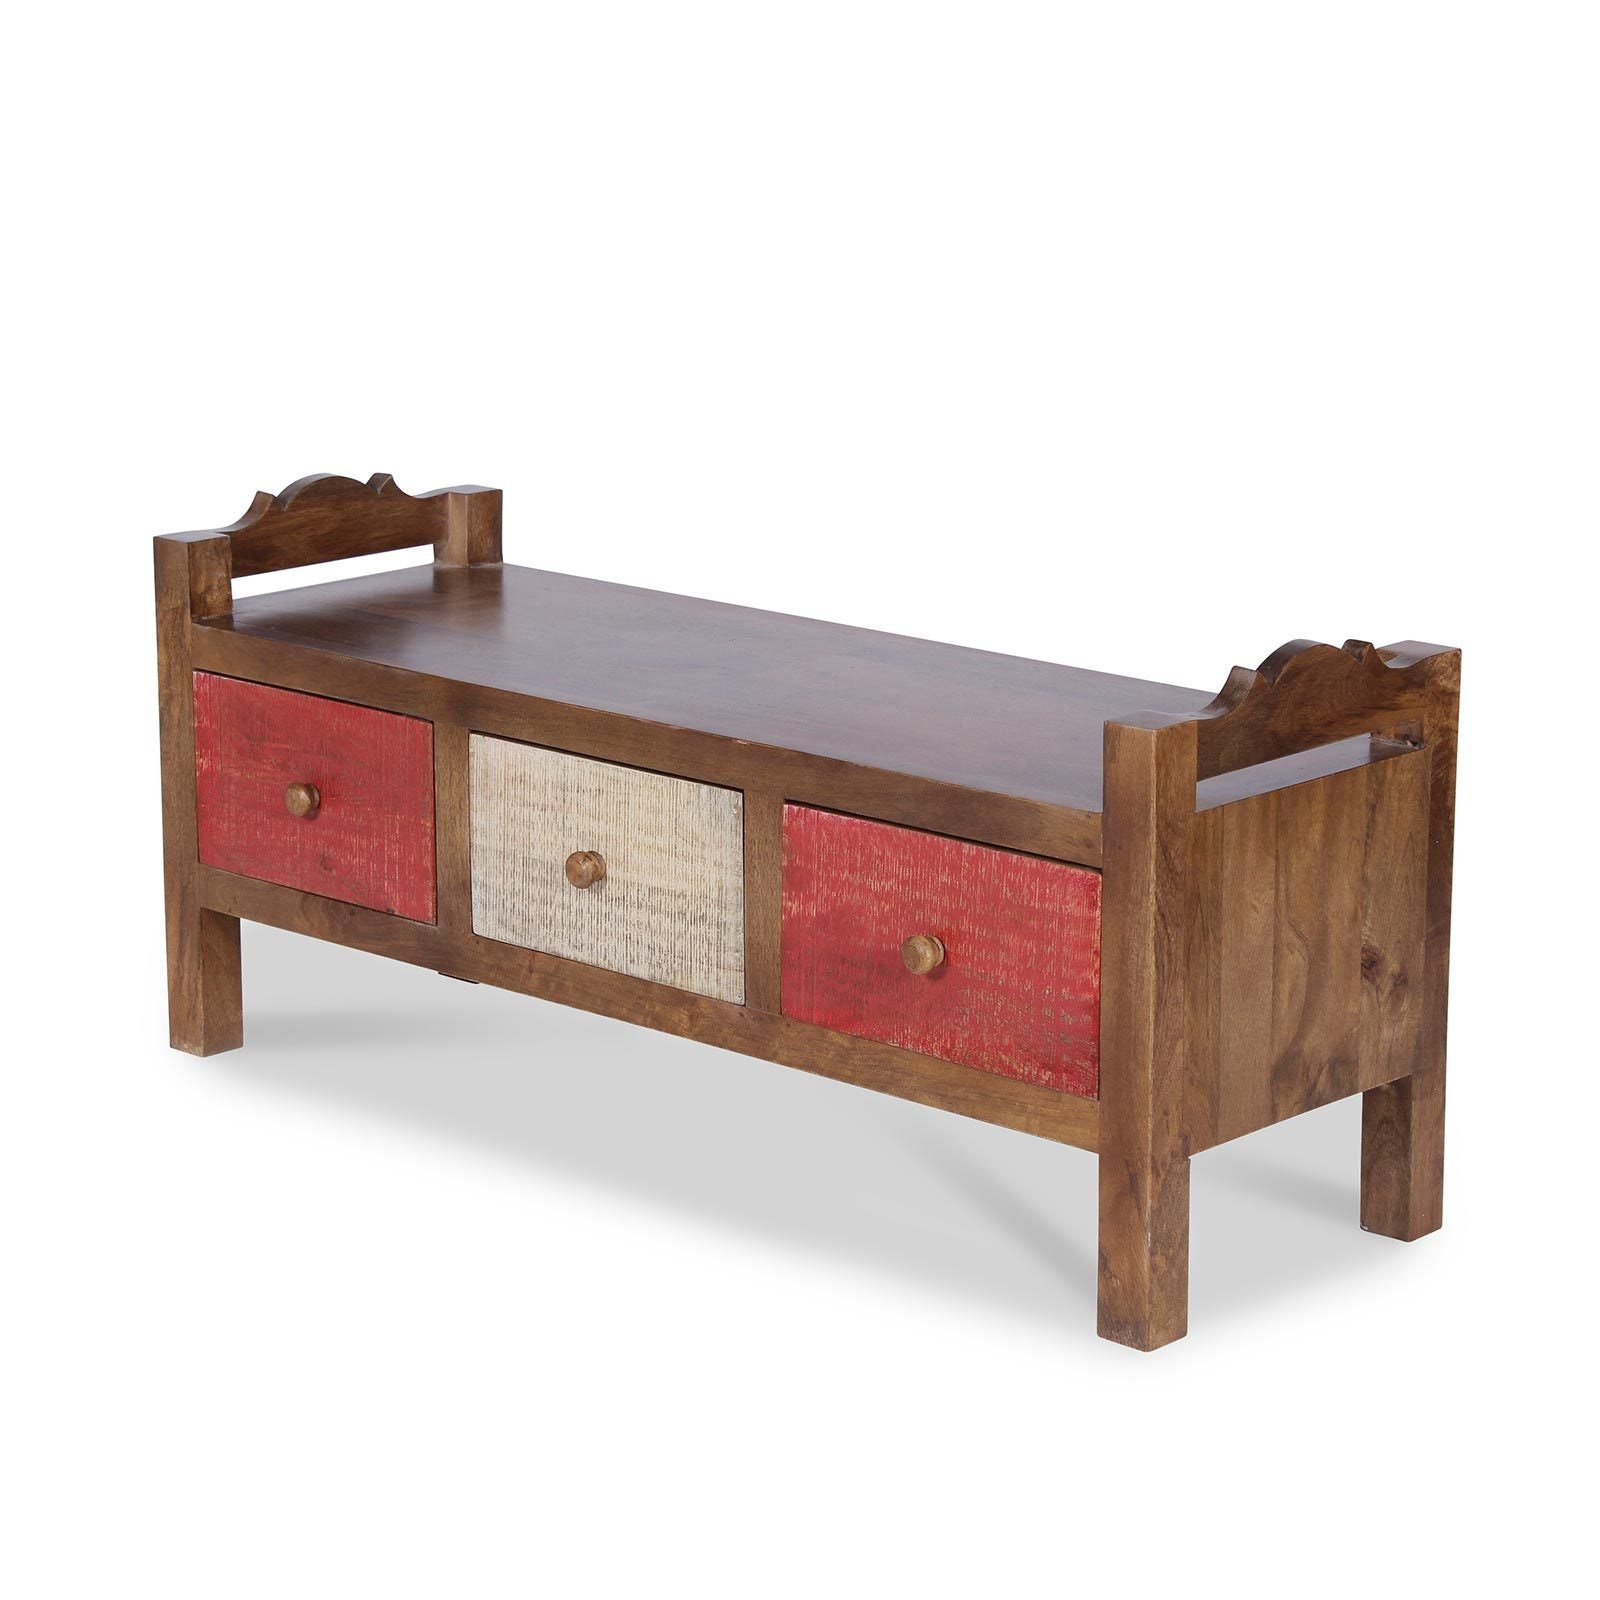 Buy Benches online